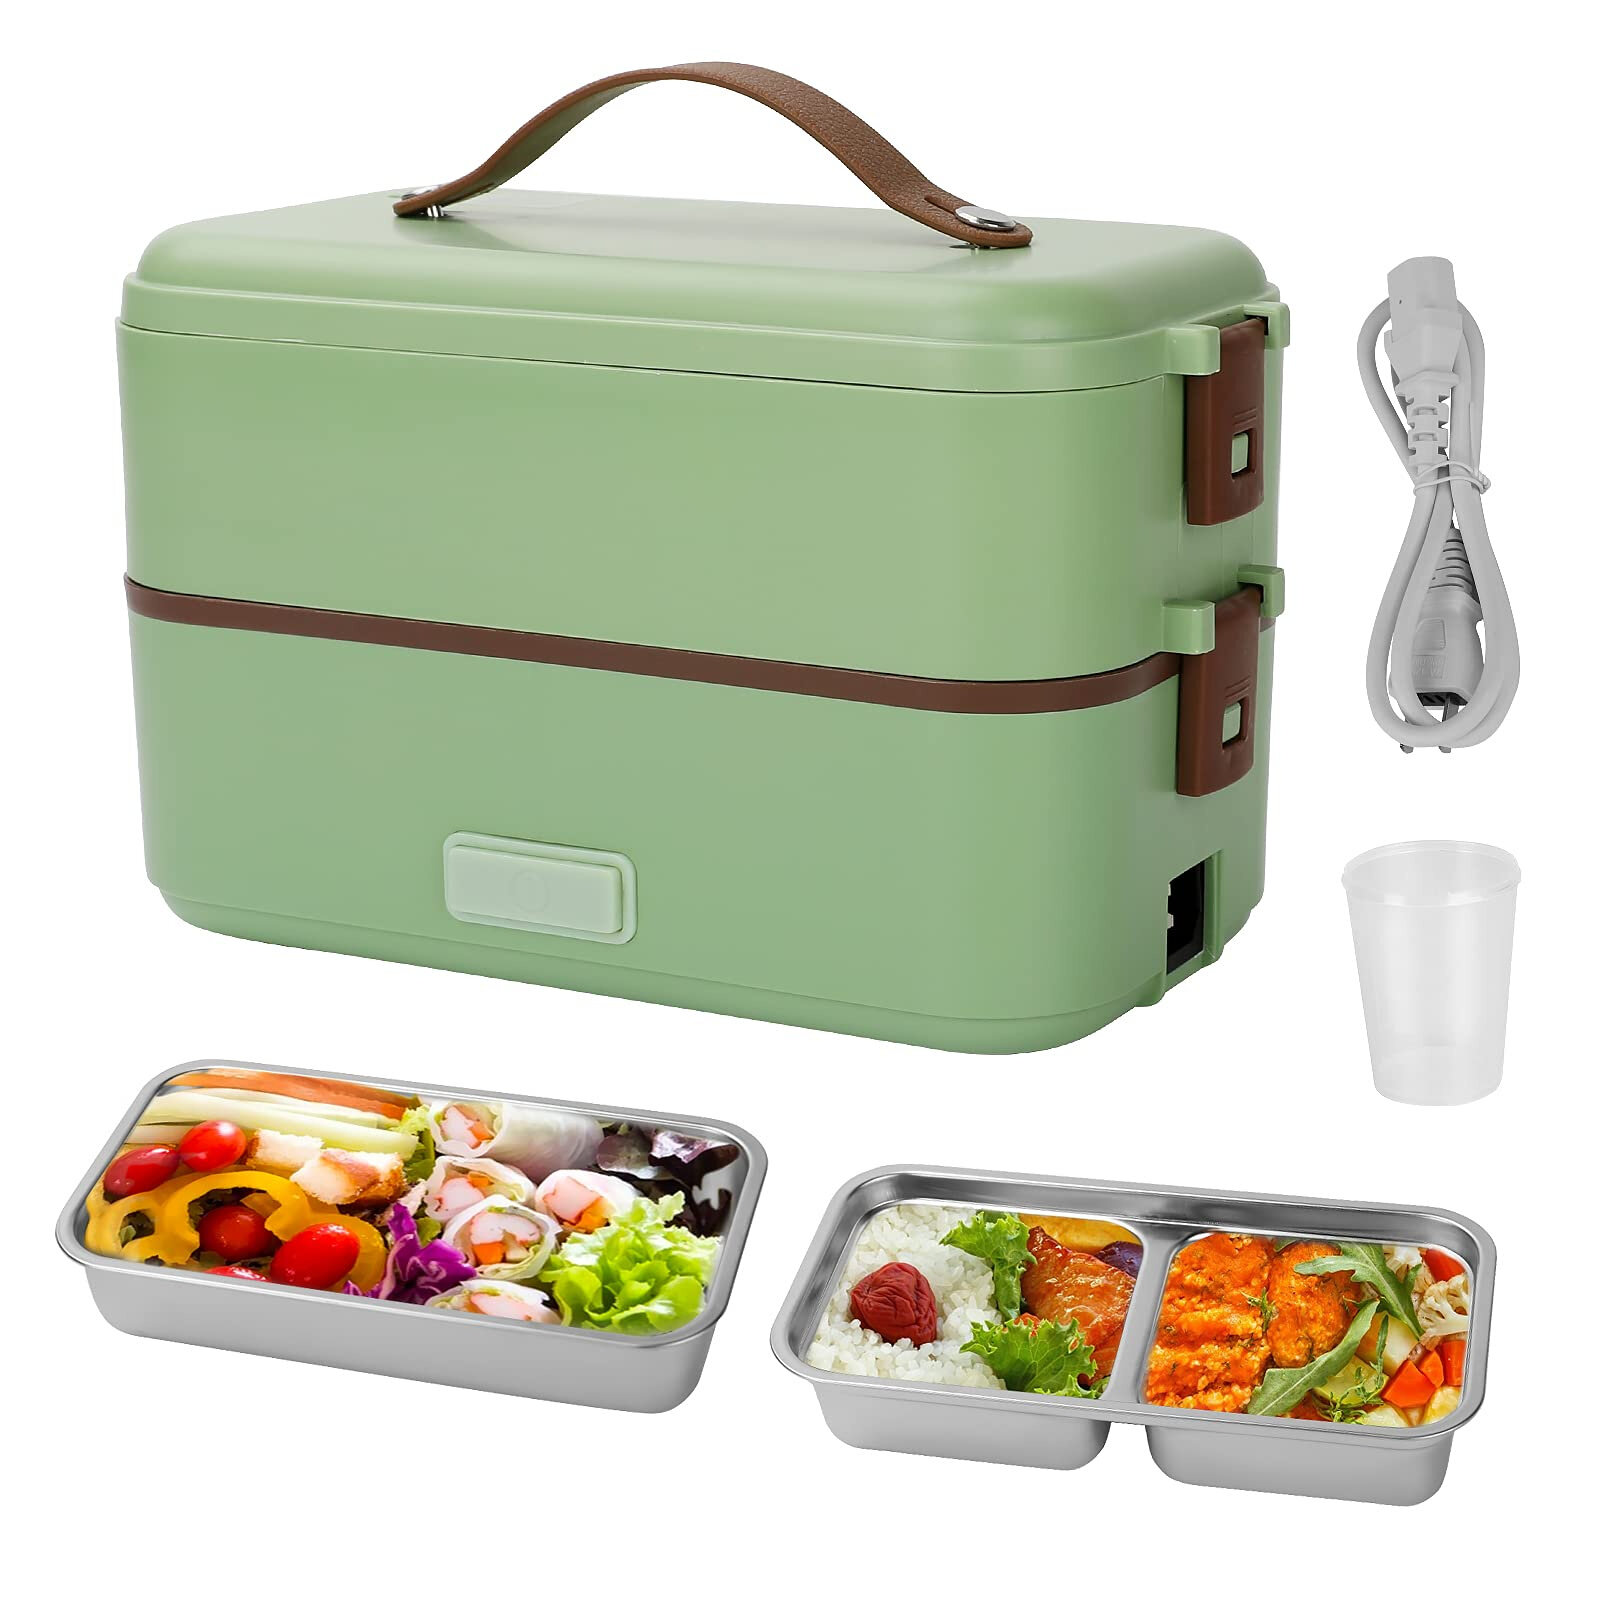 Portable Lunch Box Picnic Bento Box for Kids School Food Heater Rice Container 